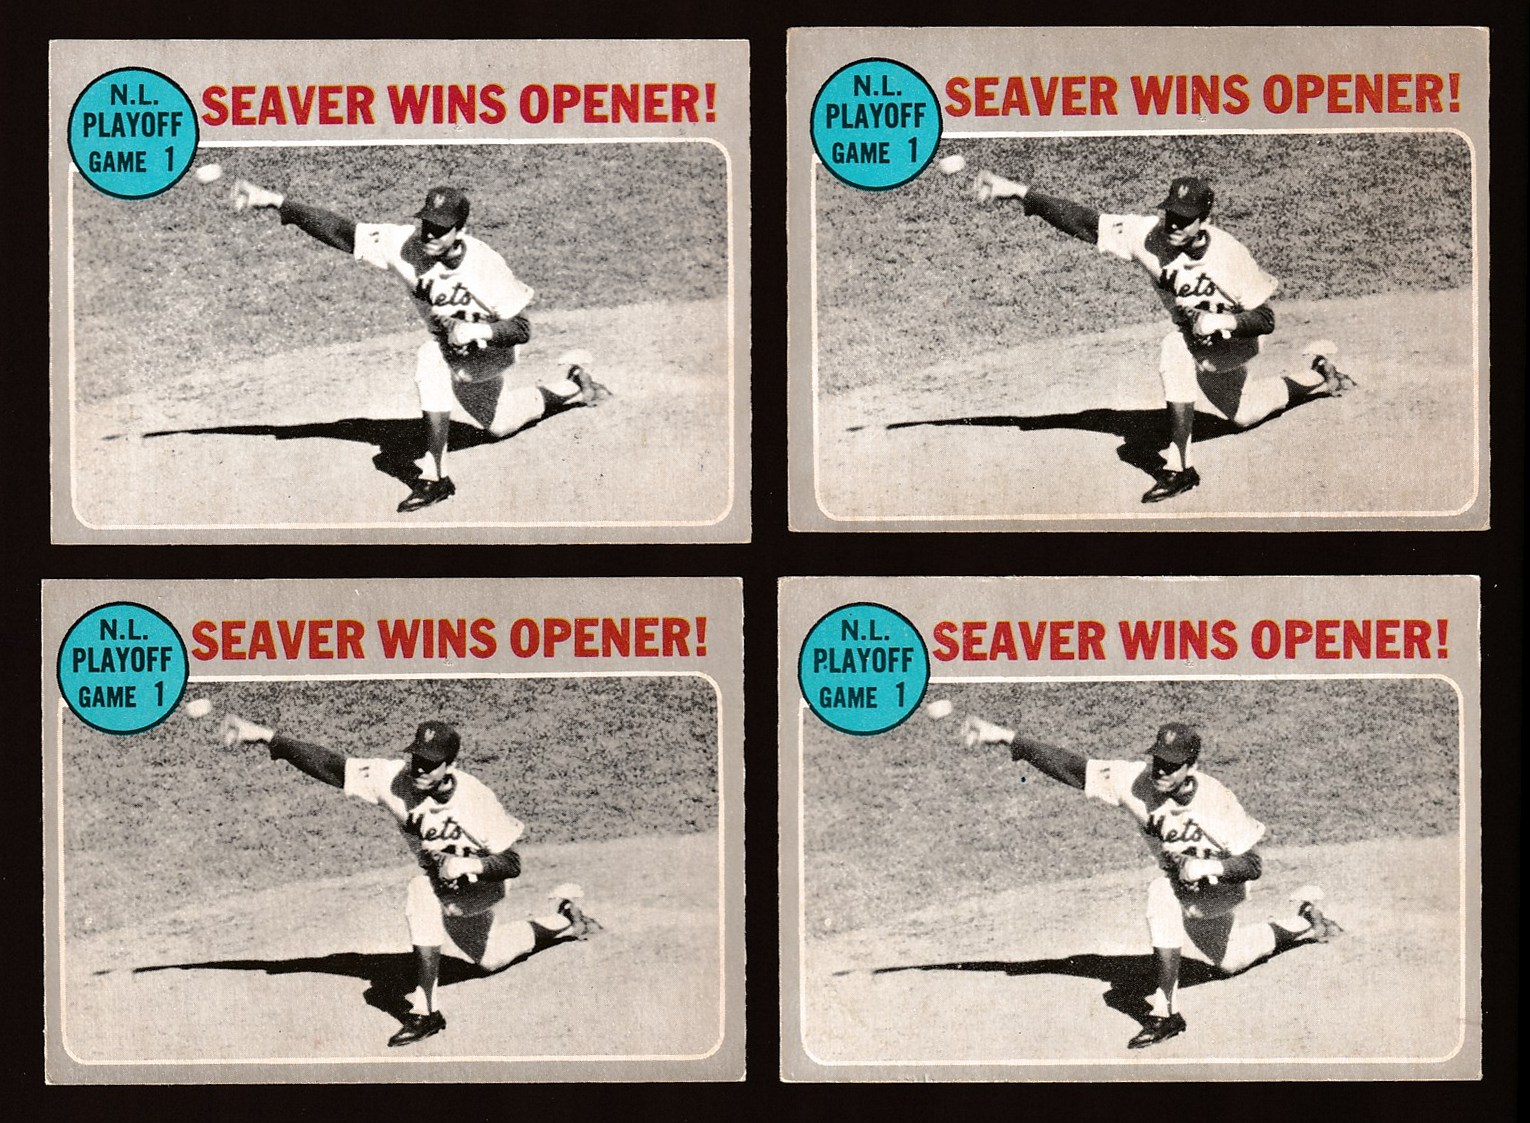 1970 O-Pee-Chee/OPC #195 N.L Playoff Game #1 (pictures Tom Seaver) (Mets vs Baseball cards value